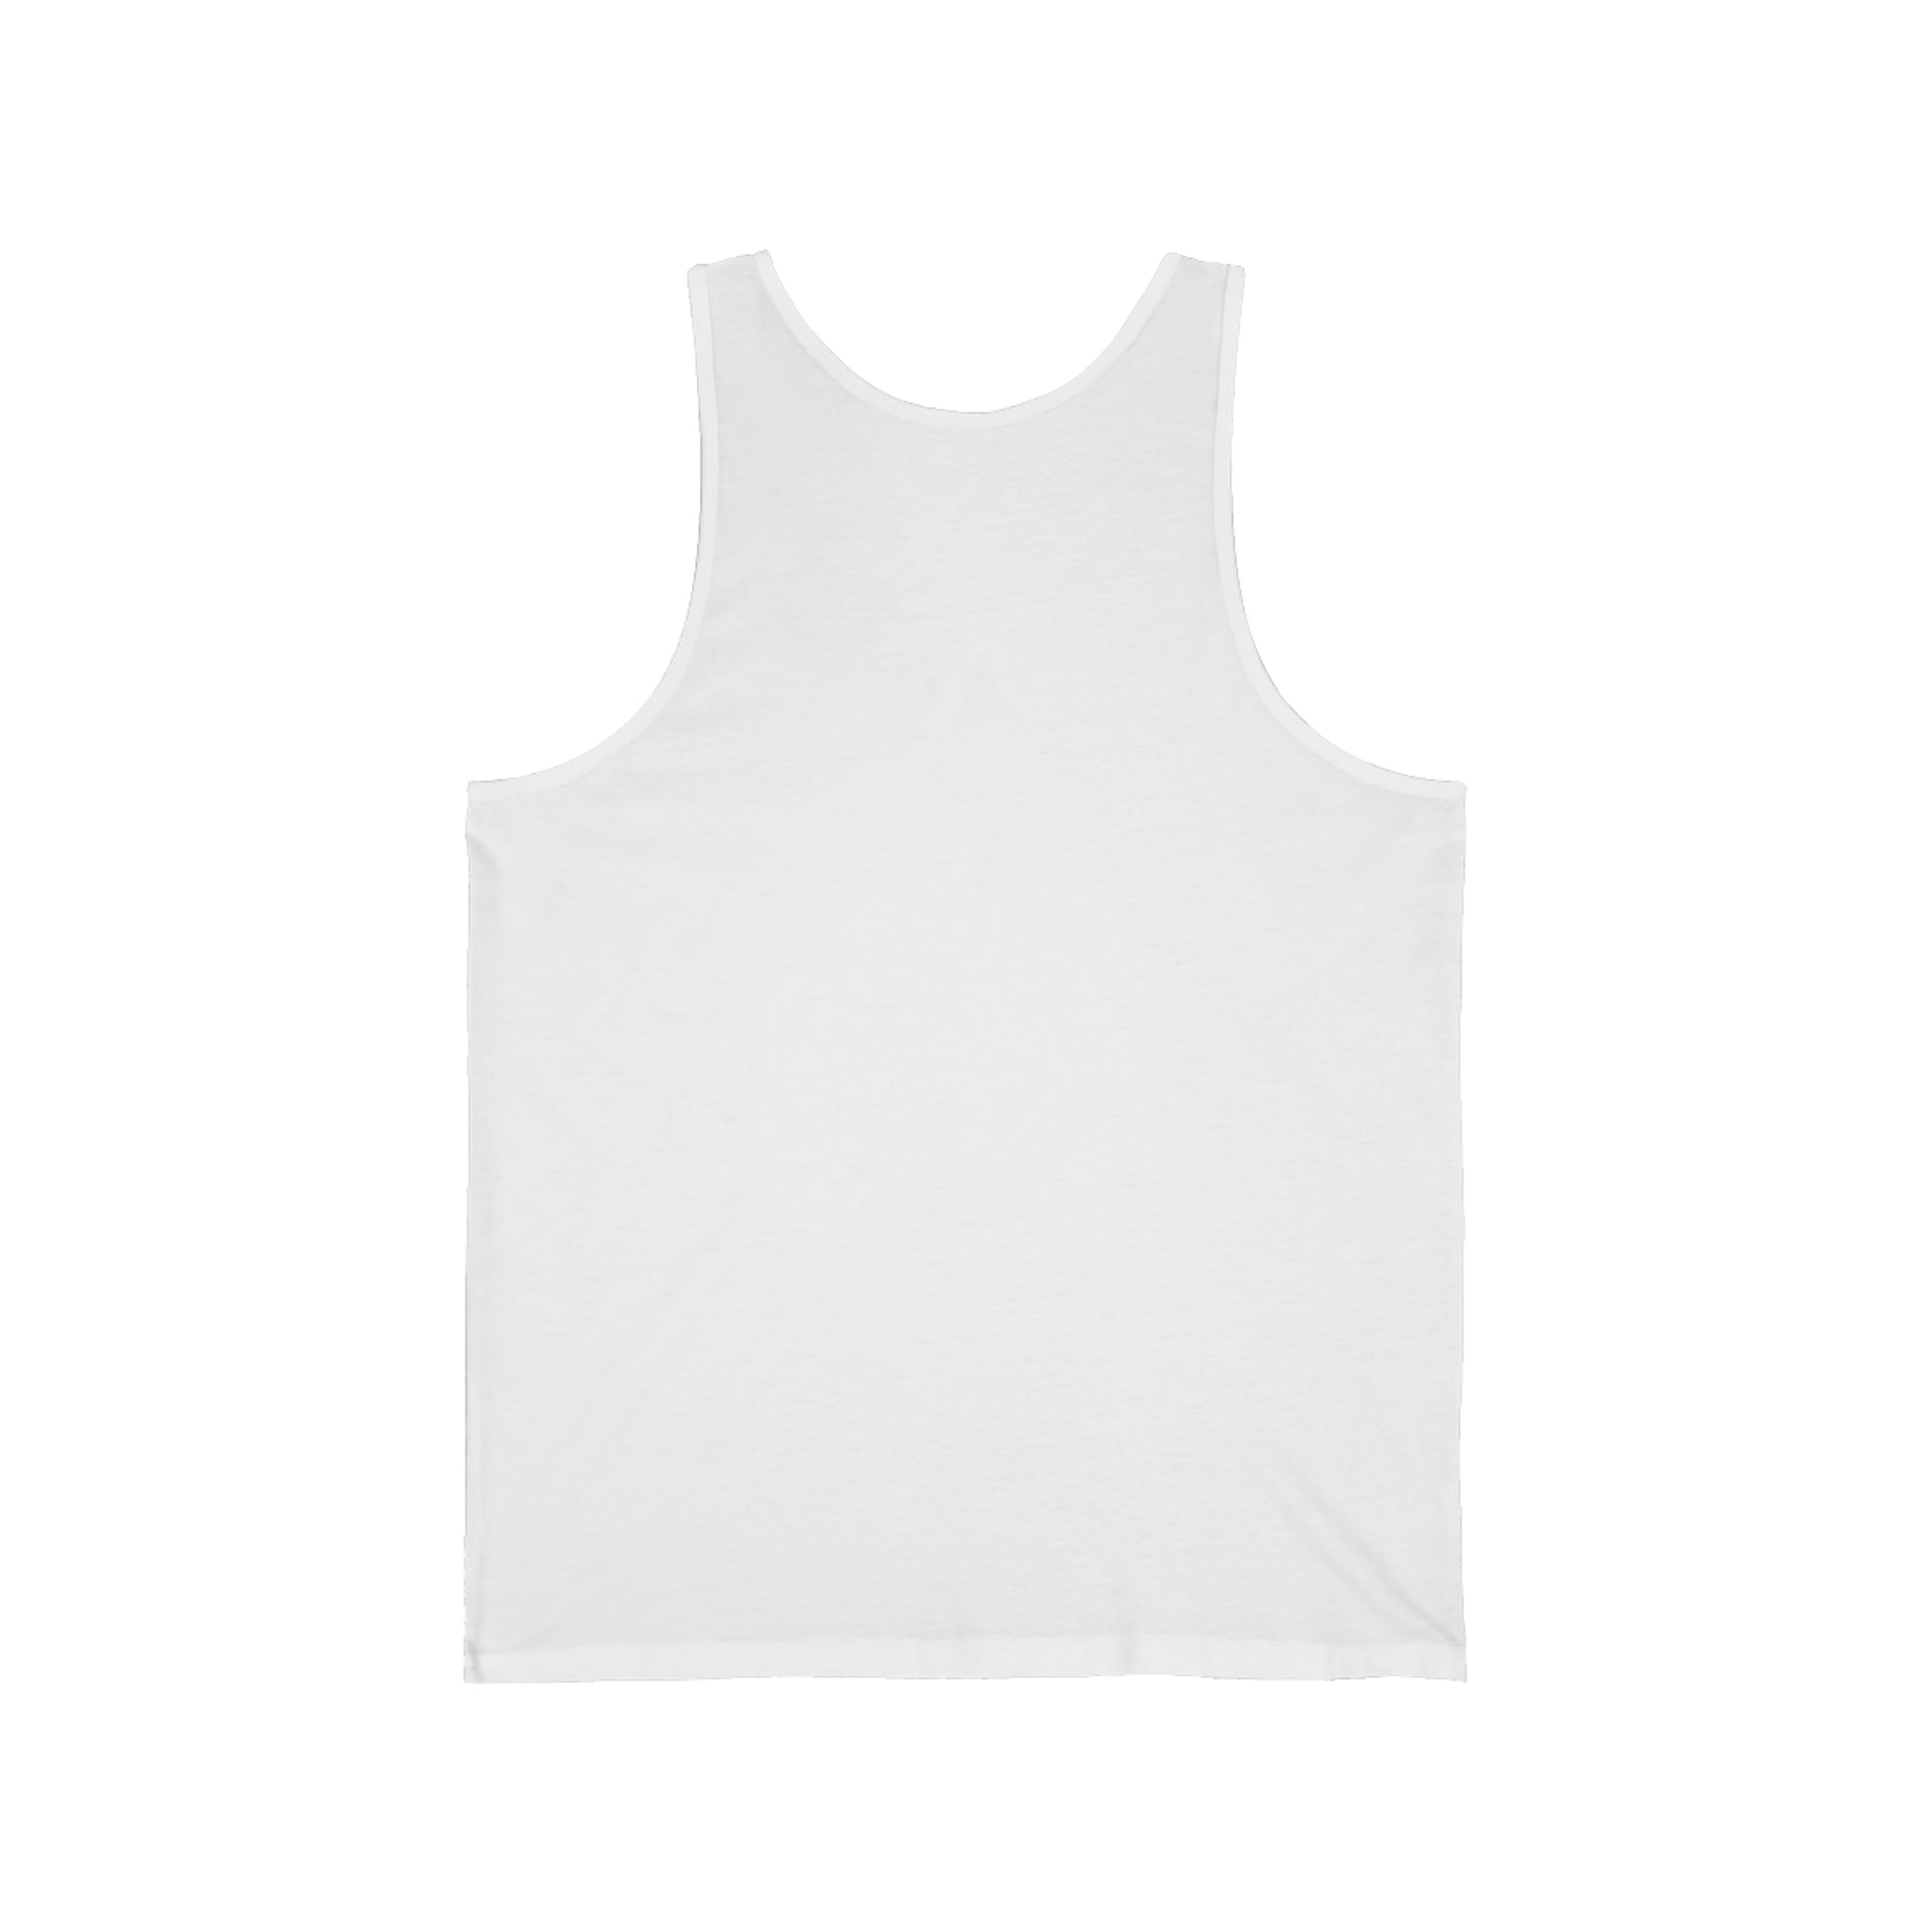 Plain white Unisex Jersey Tank displayed against a white background, featuring a sleeveless design with a scoop neckline, perfect for the casual vibes of Cabbagetown, Toronto.